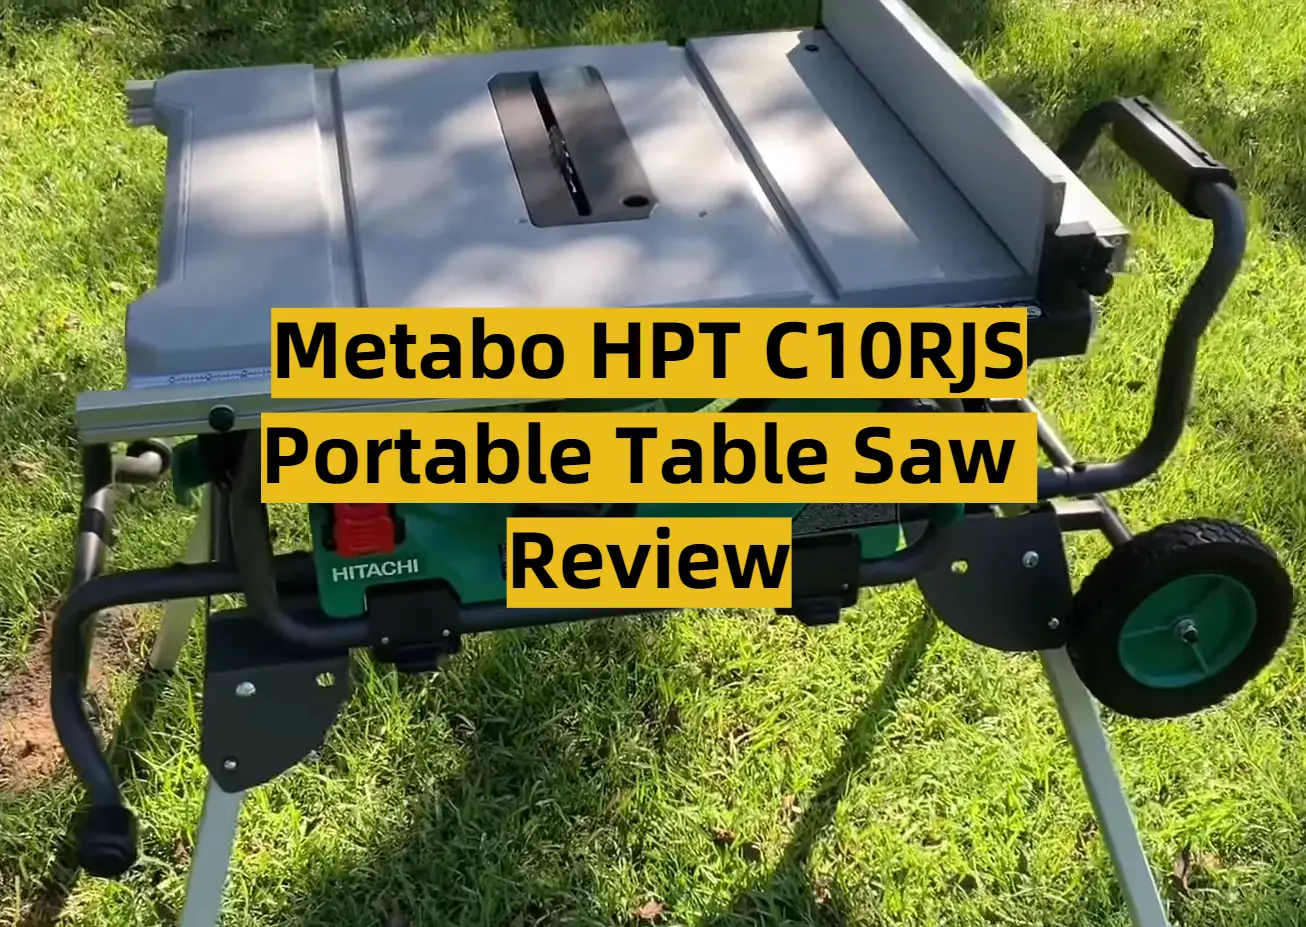 Metabo HPT C10RJS Portable Table Saw Review